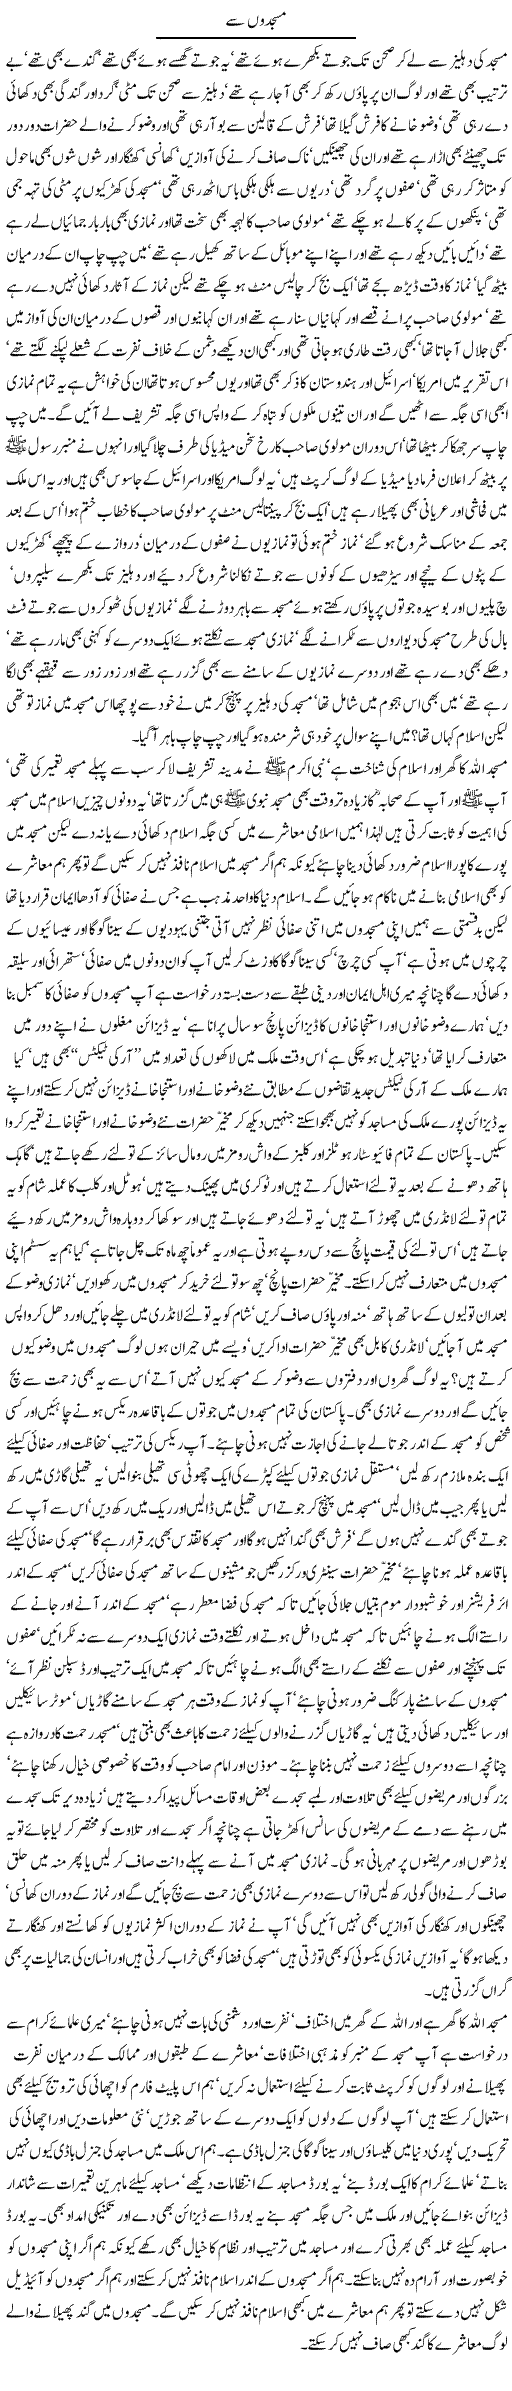 From Mosques Express Column Javed Chaudhry 3 April 2011